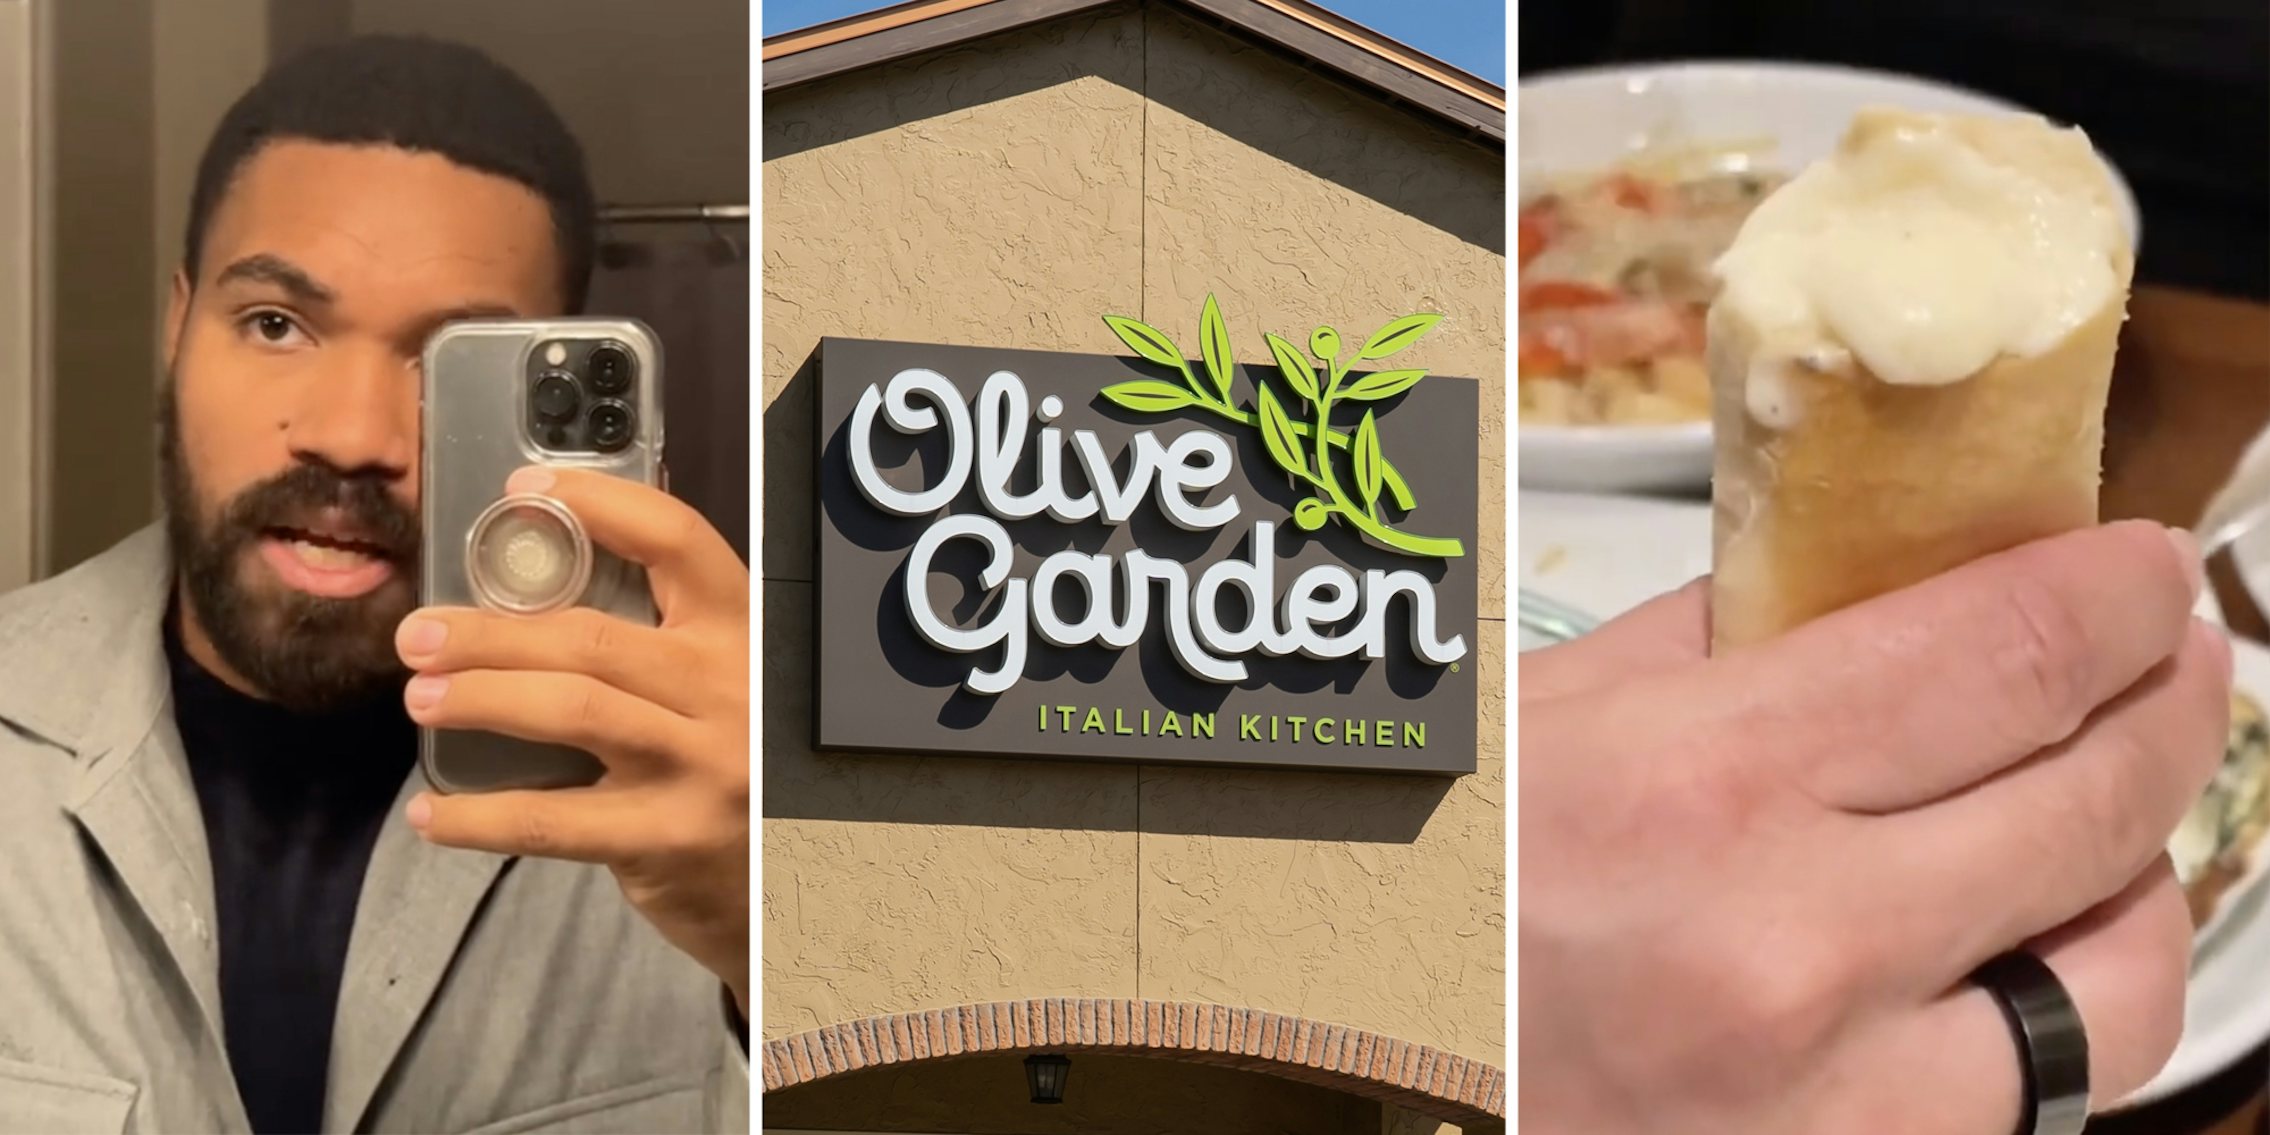 Woman's Reaction to Olive Garden's Cheese Grater Goes Viral